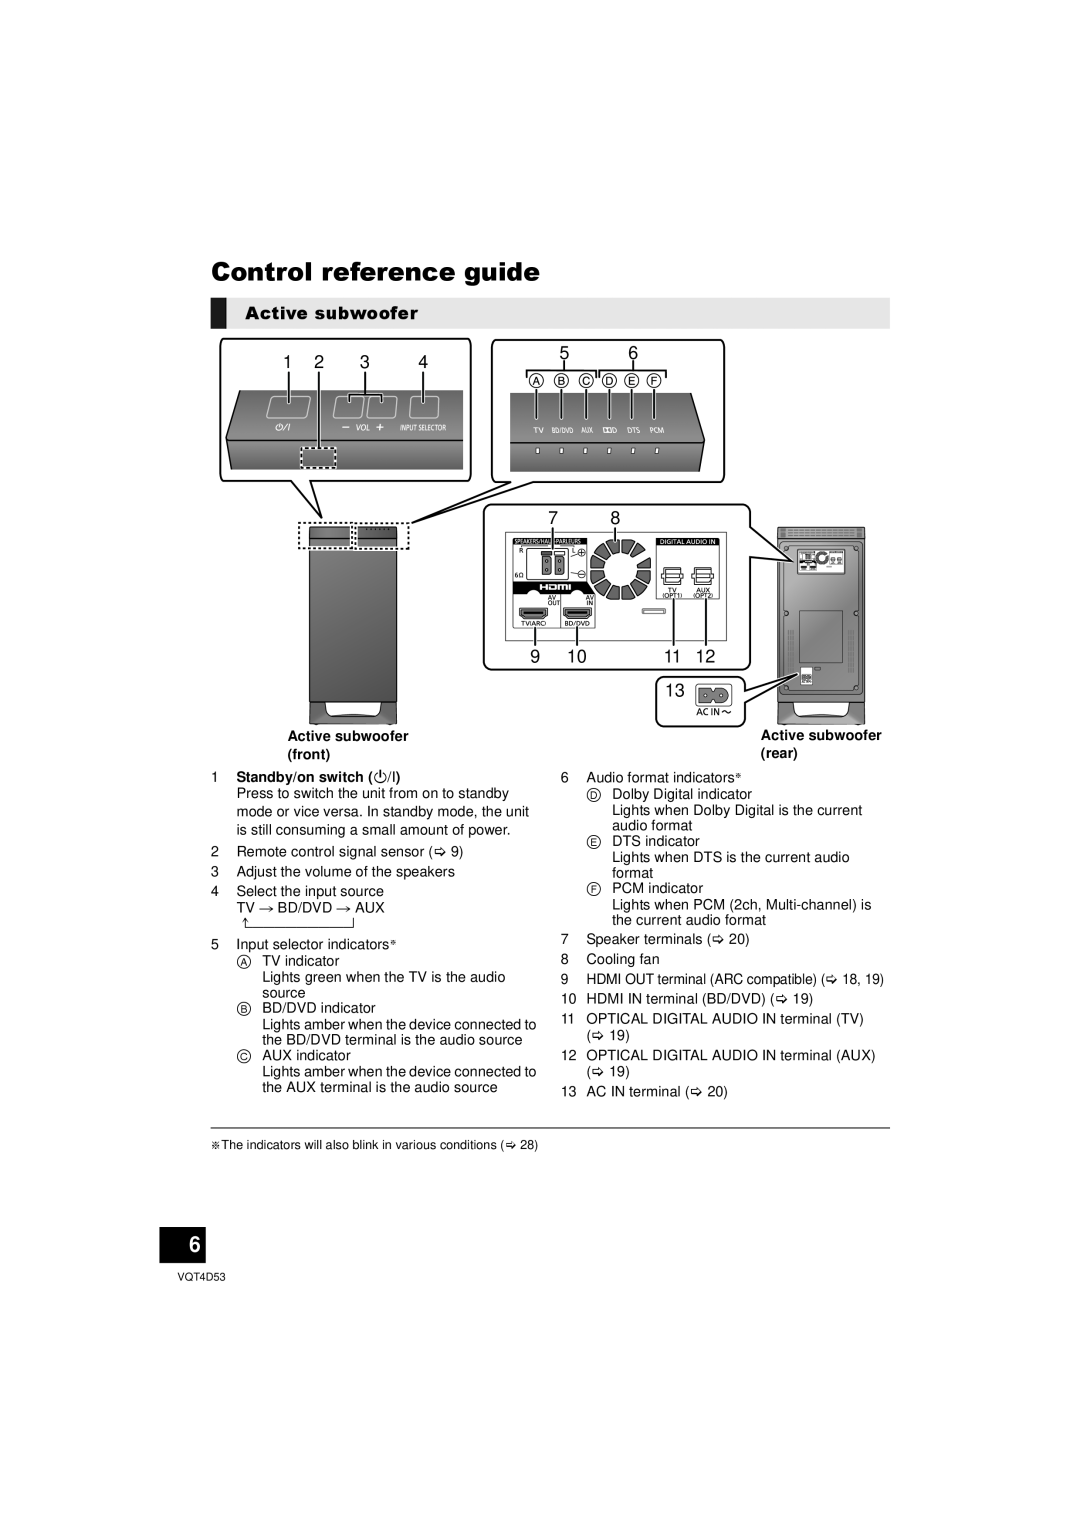 Panasonic SC-HTB20 owner manual Control reference guide, Active subwoofer 